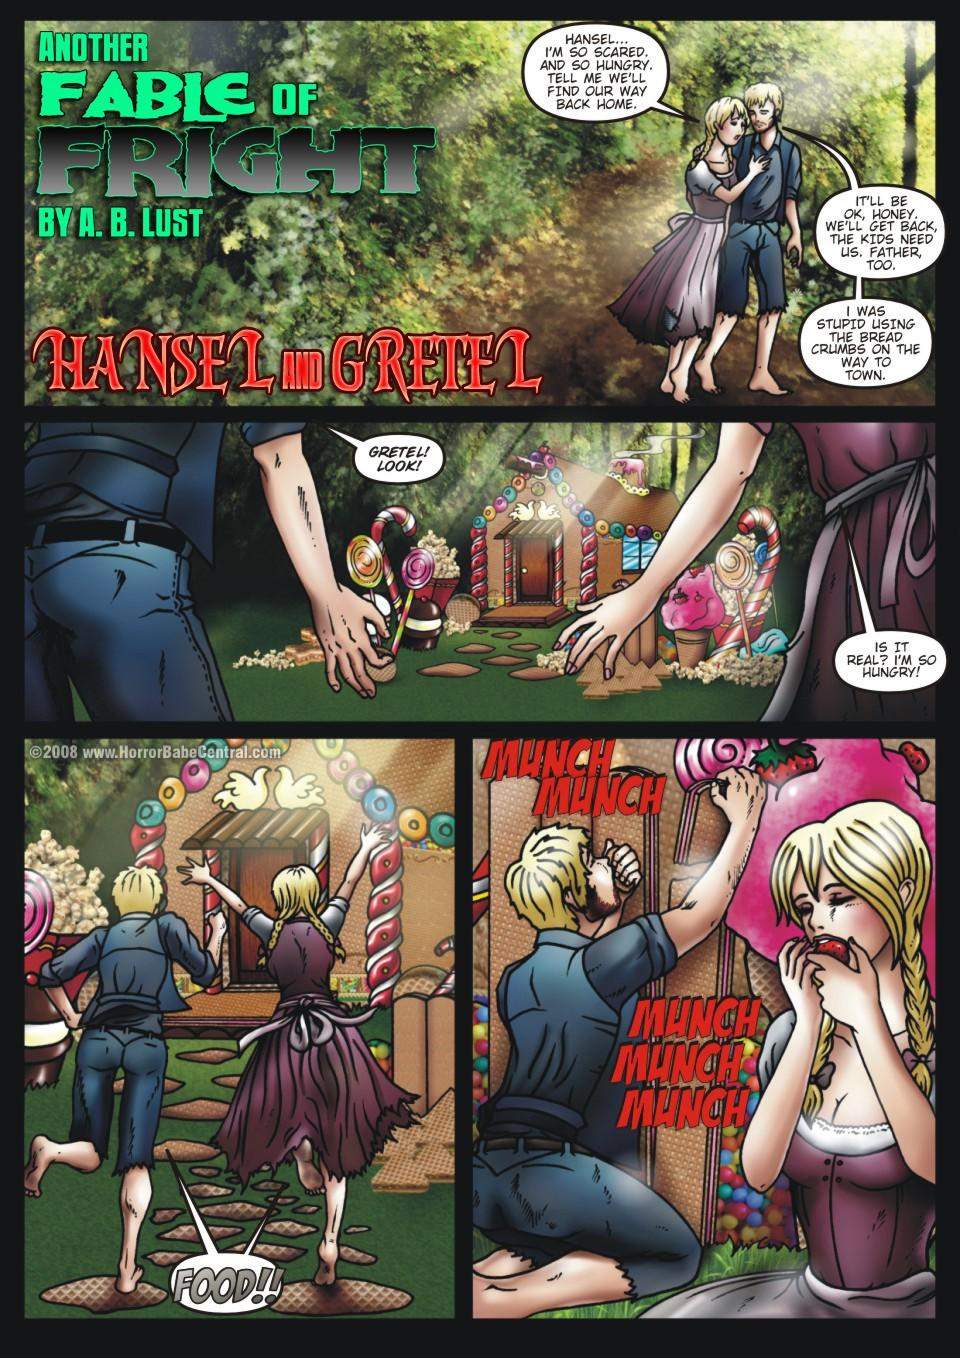 SureFap xxx porno Hansel and Gretel - [HorrorBabeCentral][A.B. Lust] - Another Fable of Fright - Hansel and Gretel